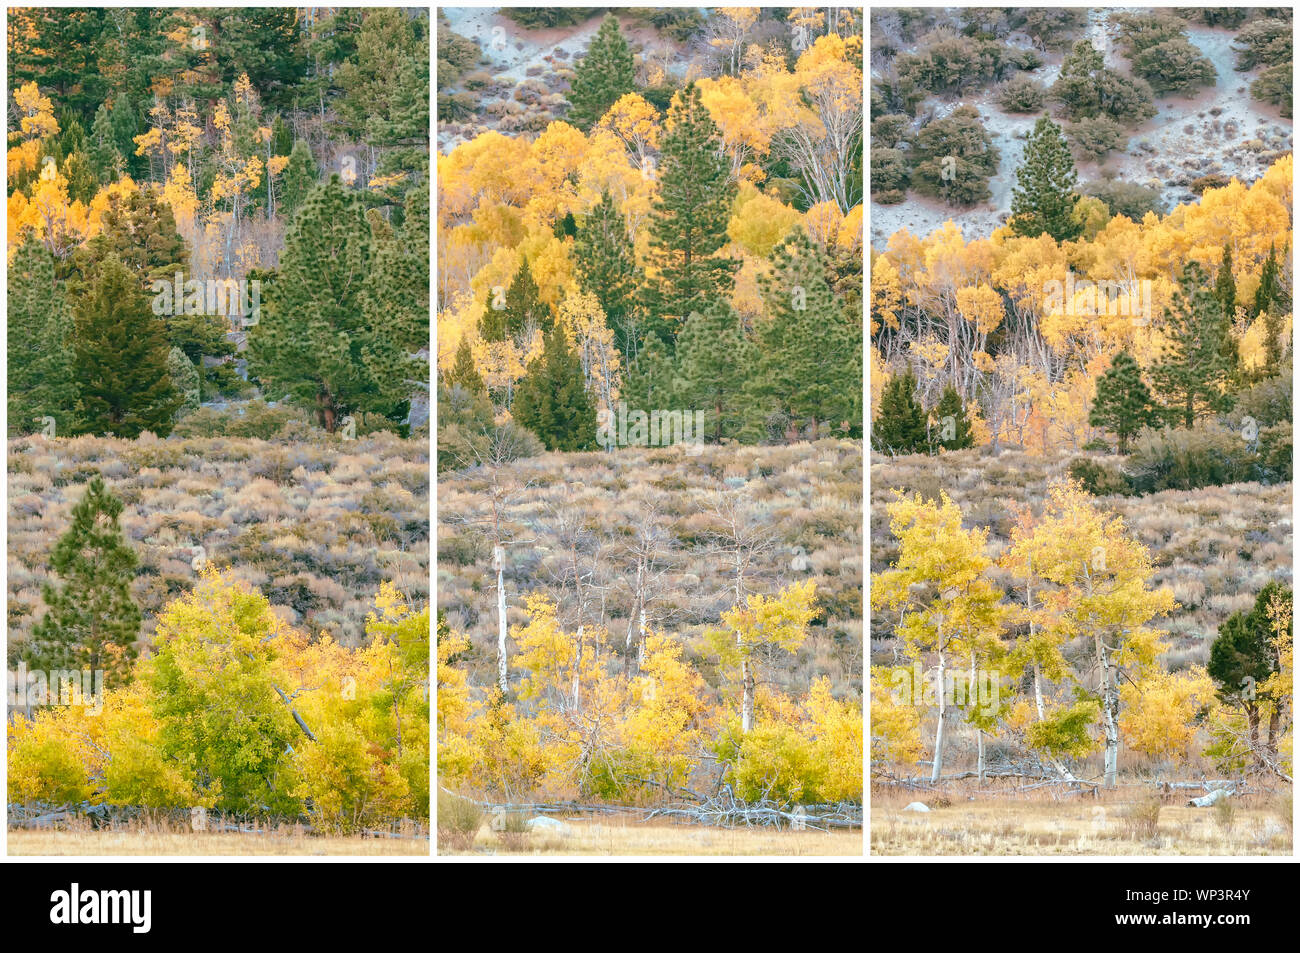 Triptych presentation of mountain aspens (Populus tremuloides)  at their peak fall foliage, Inyo National Forest, California, United States. Stock Photo